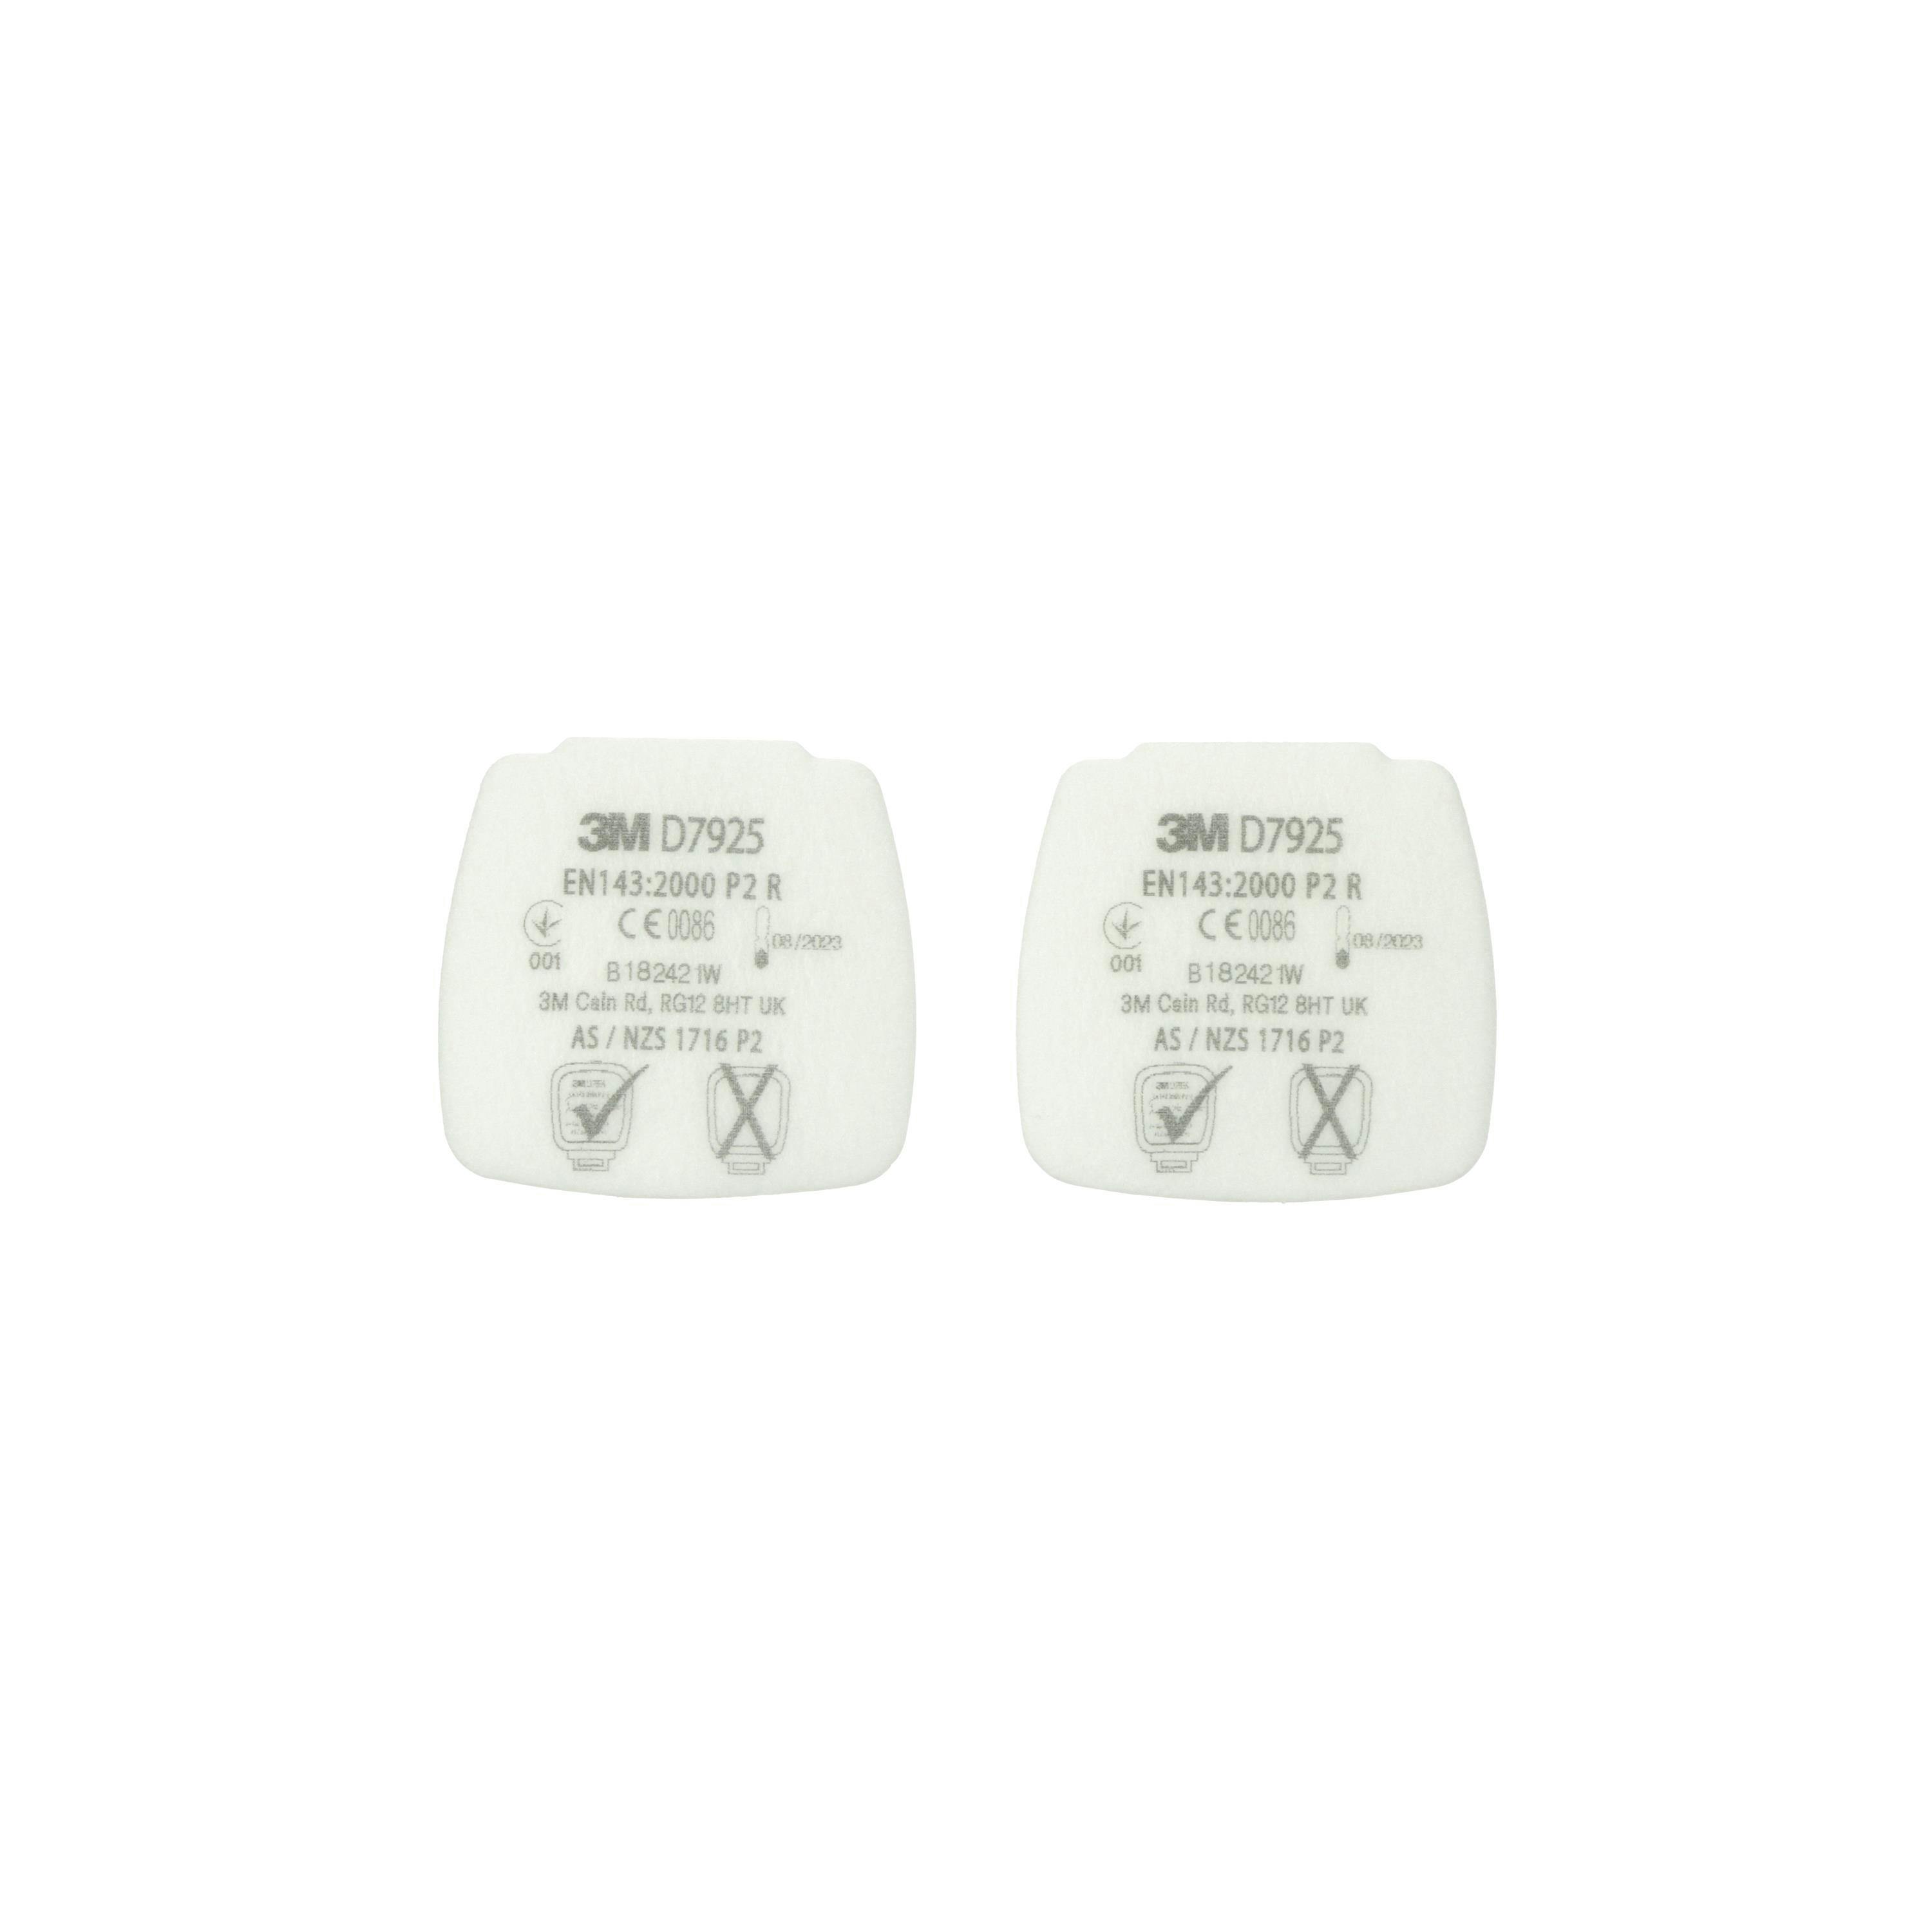 3M™ Secure Click™ Particulate Filter P2, D7925, 20 Pairs/Box